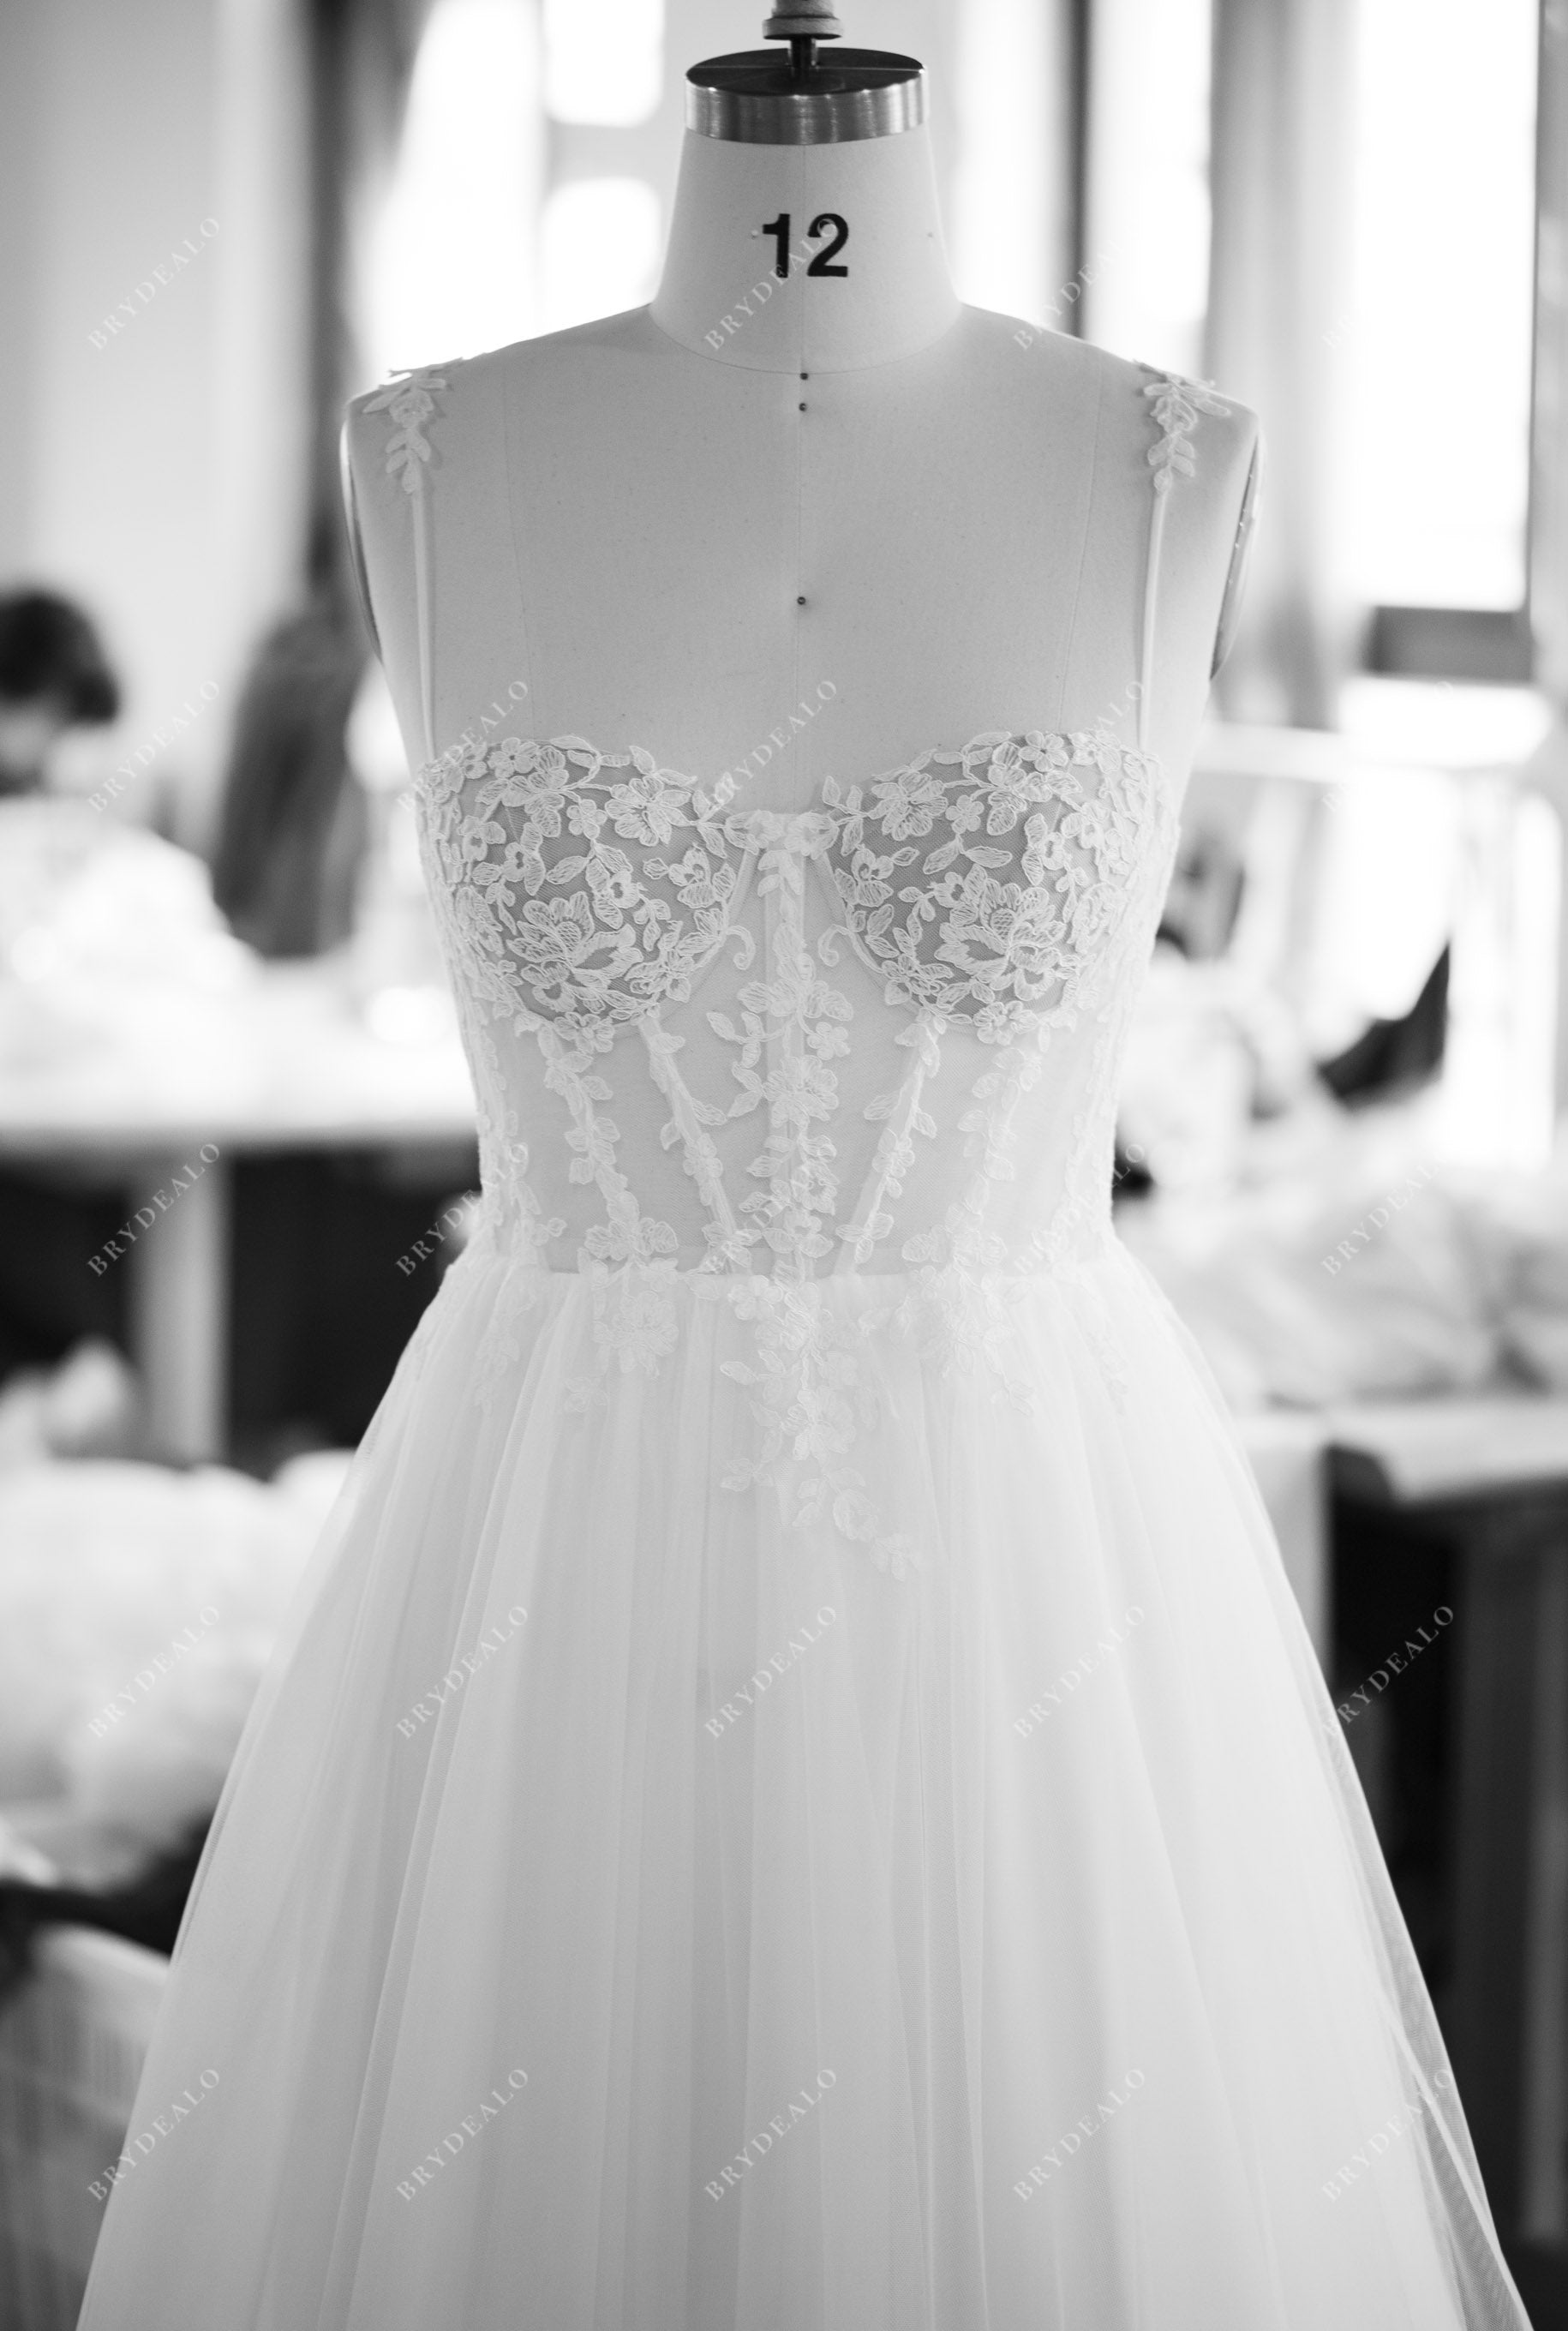 wholesale sweetheart neck thin straps corset lace wedding gown